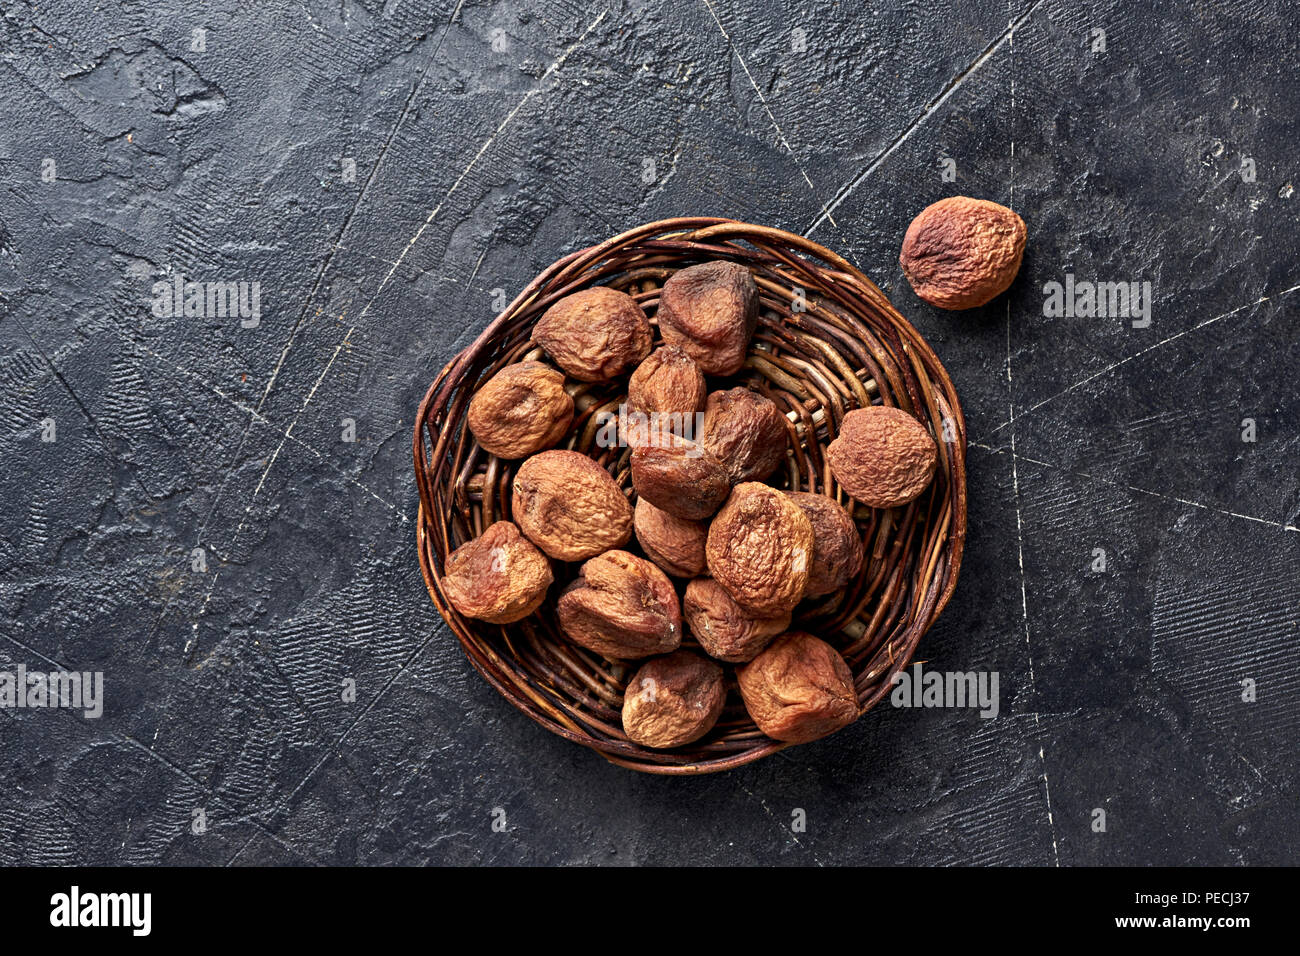 Sun dried apricots on gray background. Top view. Stock Photo